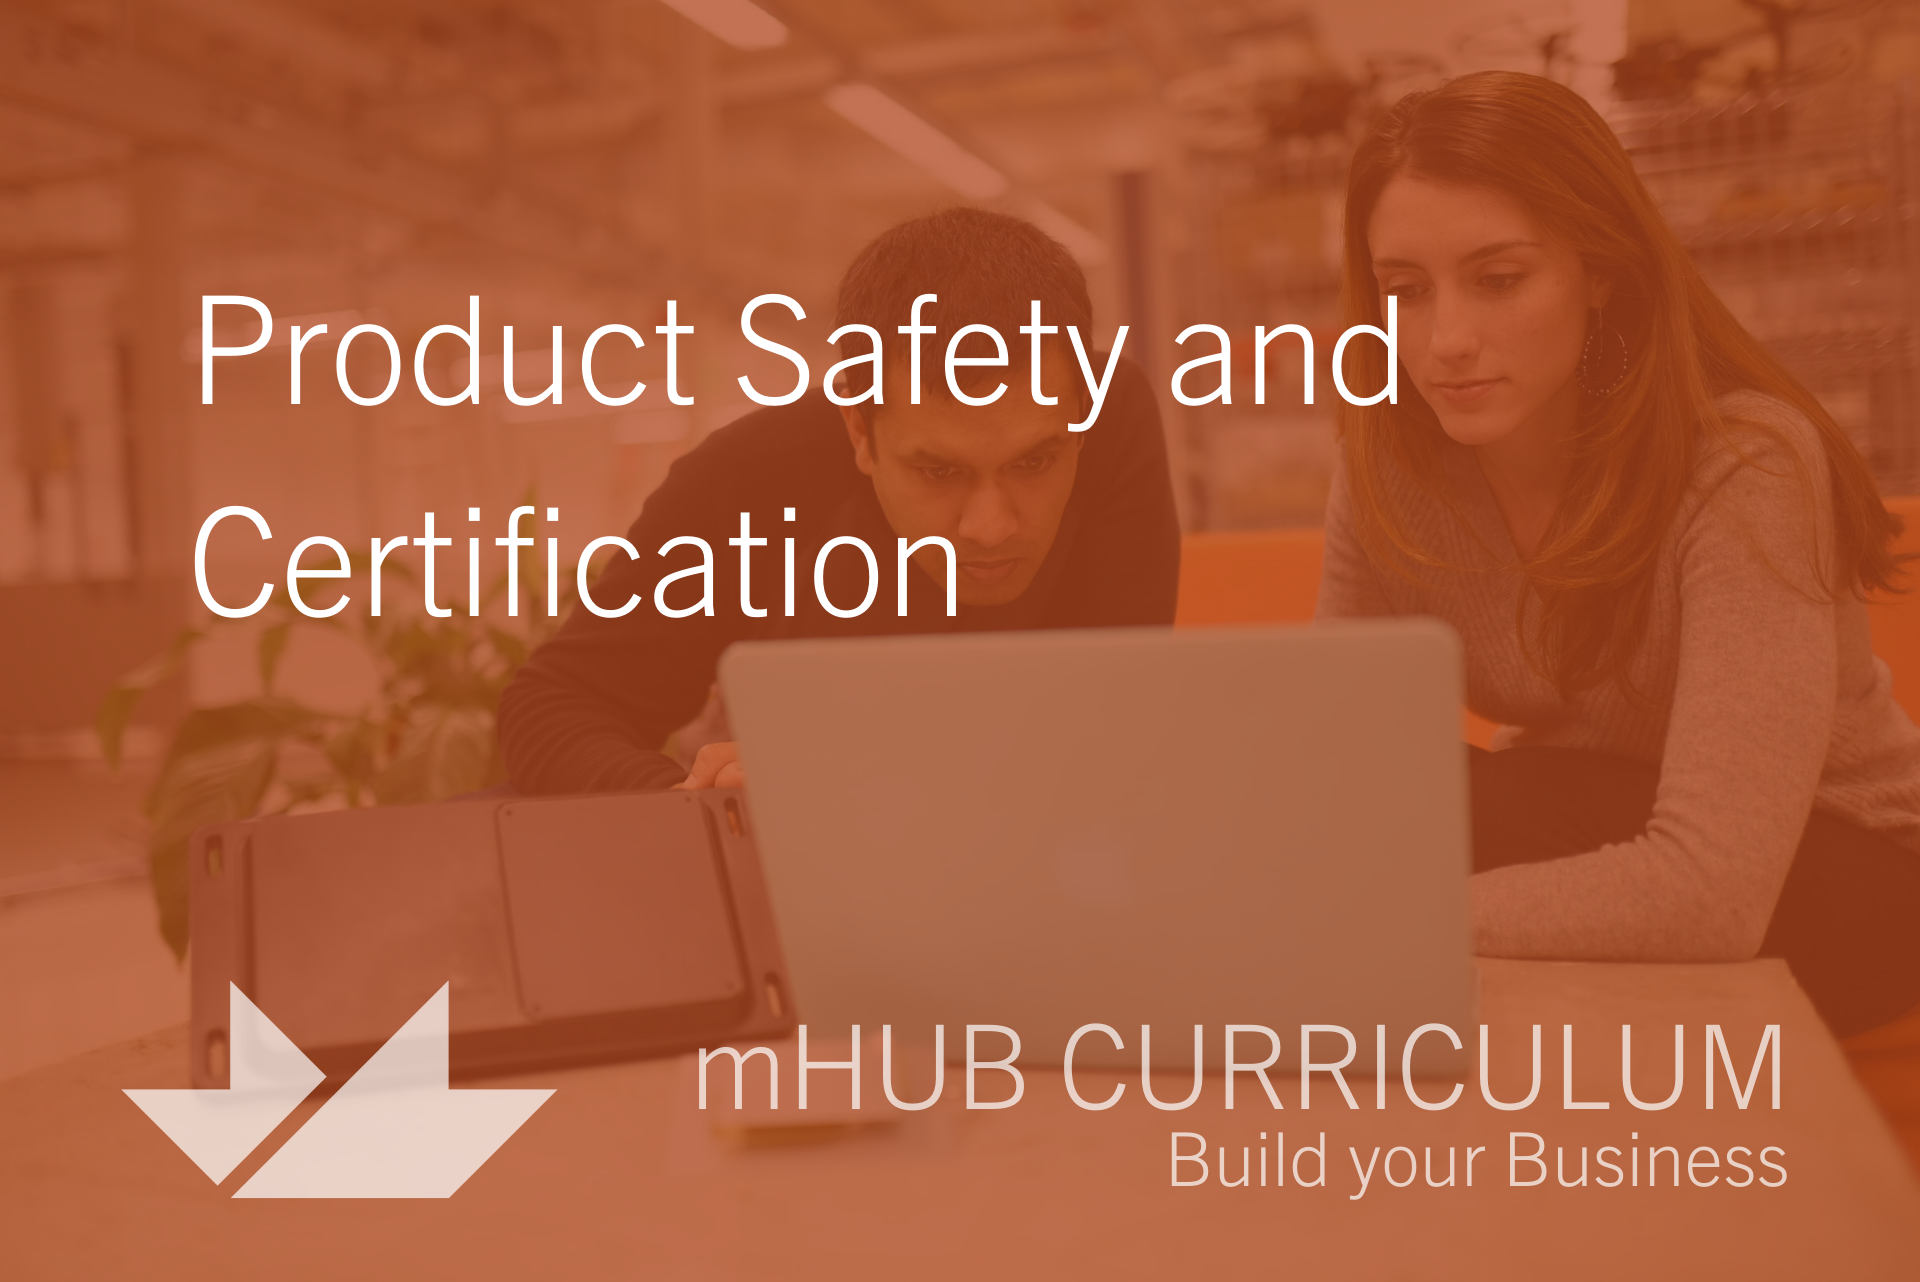 Product Safety and Certification